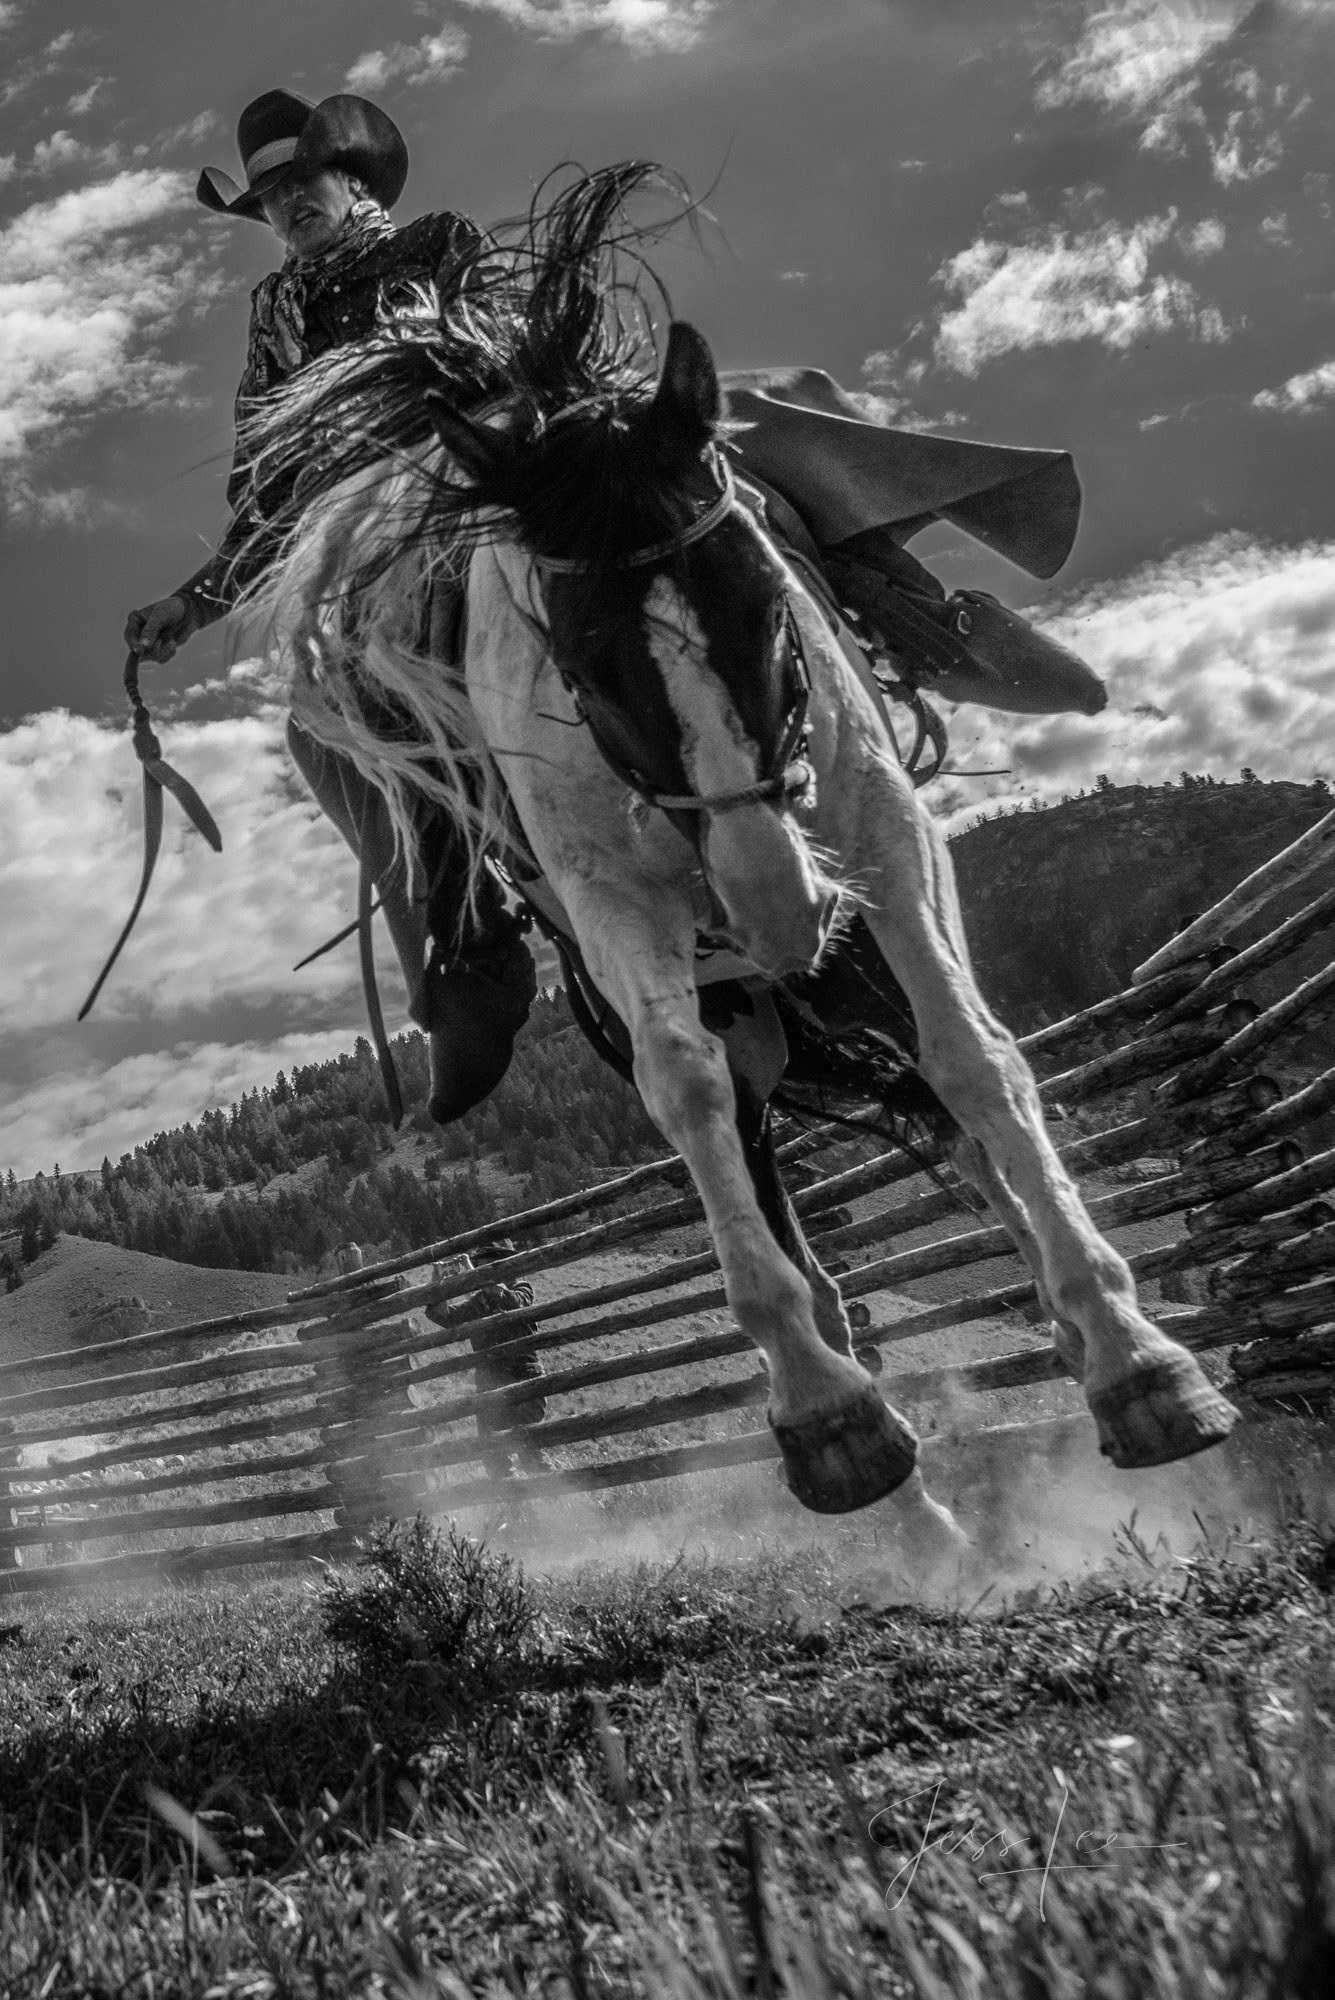 Fine Art Limited Edition Photo Prints of Cowboys, Horses, and life in the West. Bucked Up ! A Cowboy picture in black and white...